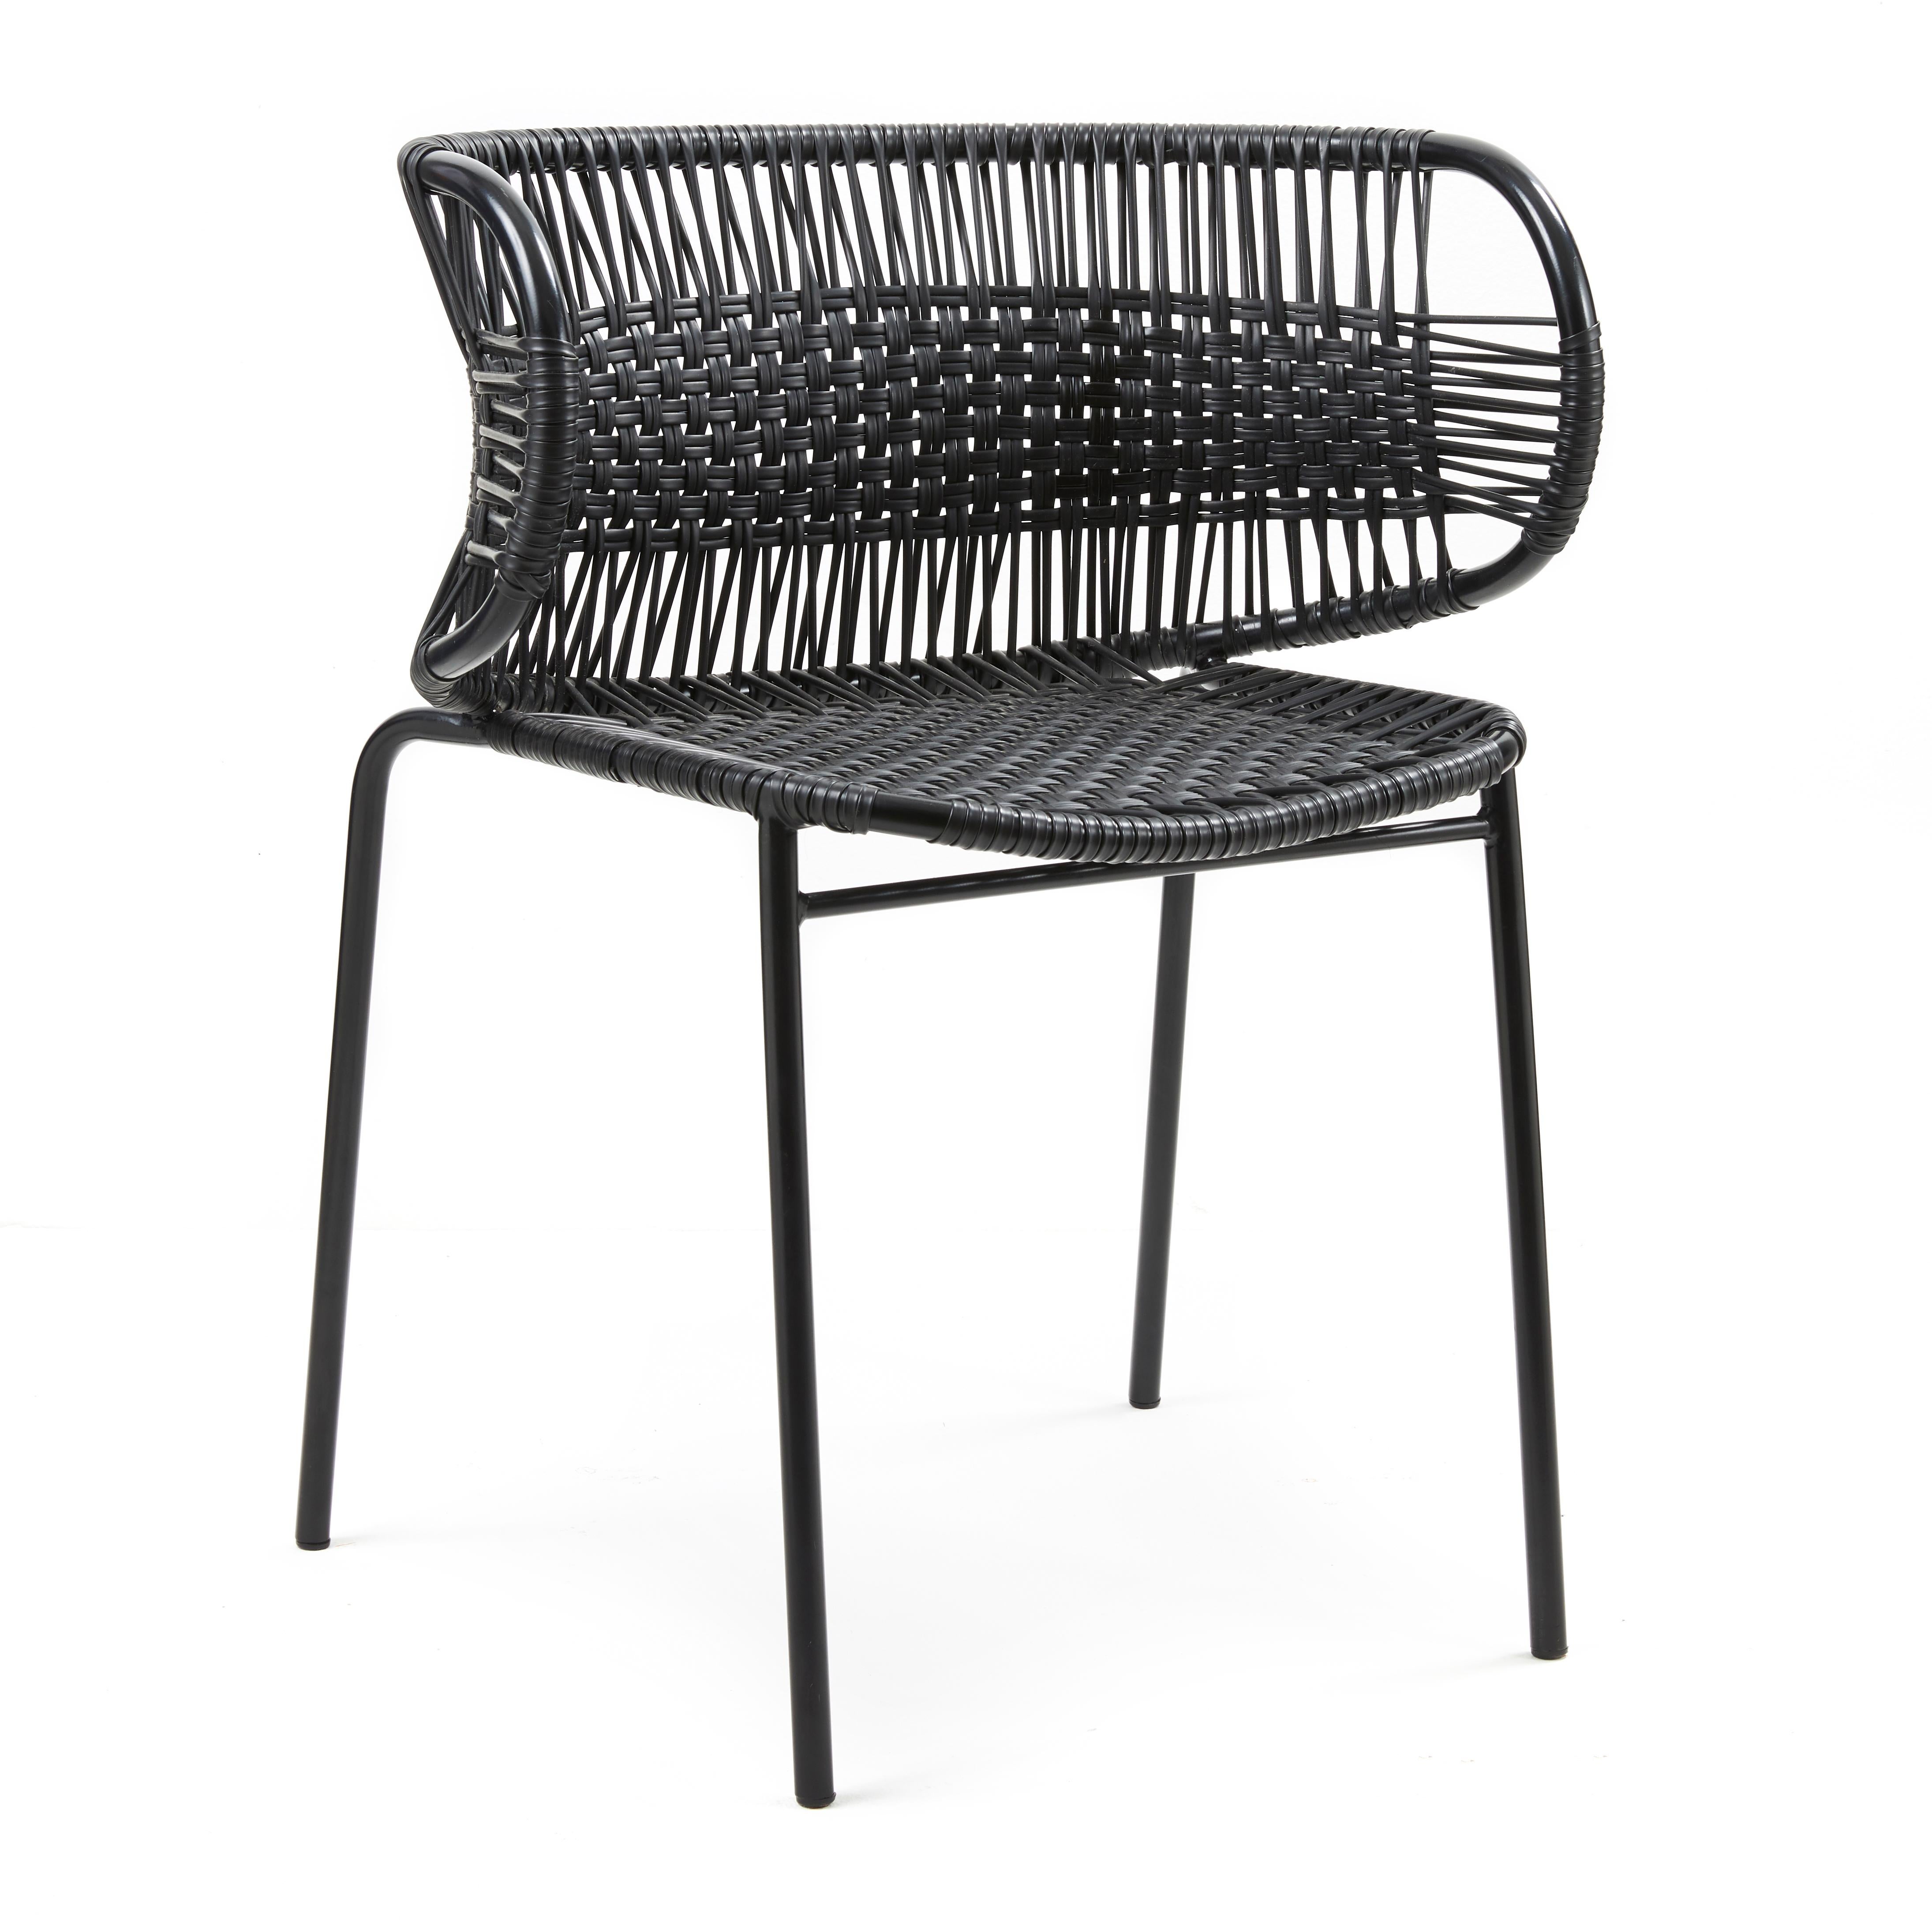 Set of 4 black Cielo stacking chair with armrest by Sebastian Herkner
Materials: galvanized and powder-coated tubular steel. PVC strings are made from recycled plastic.
Technique: made from recycled plastic and weaved by local craftspeople in